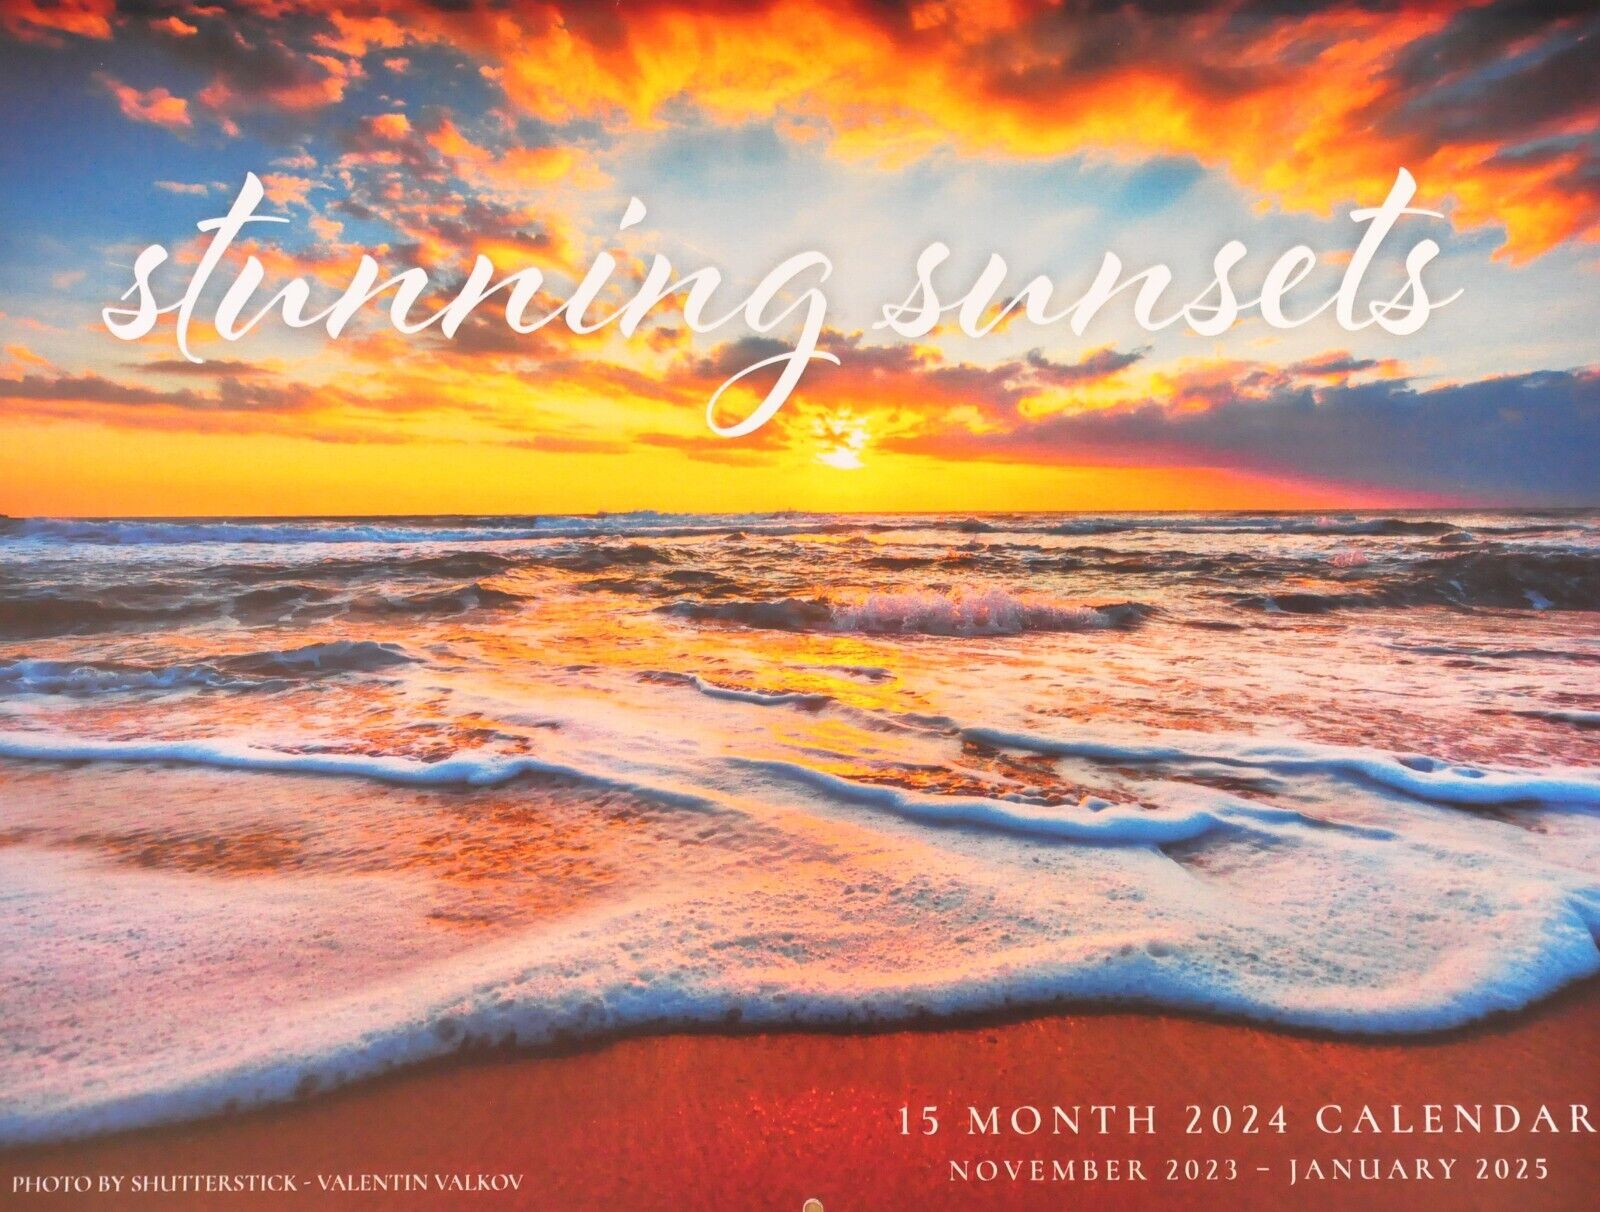 TWO FOR ONE SPECIAL Stunning Sunsets 2024 WALL CALENDAR Beaches Hawaii ++